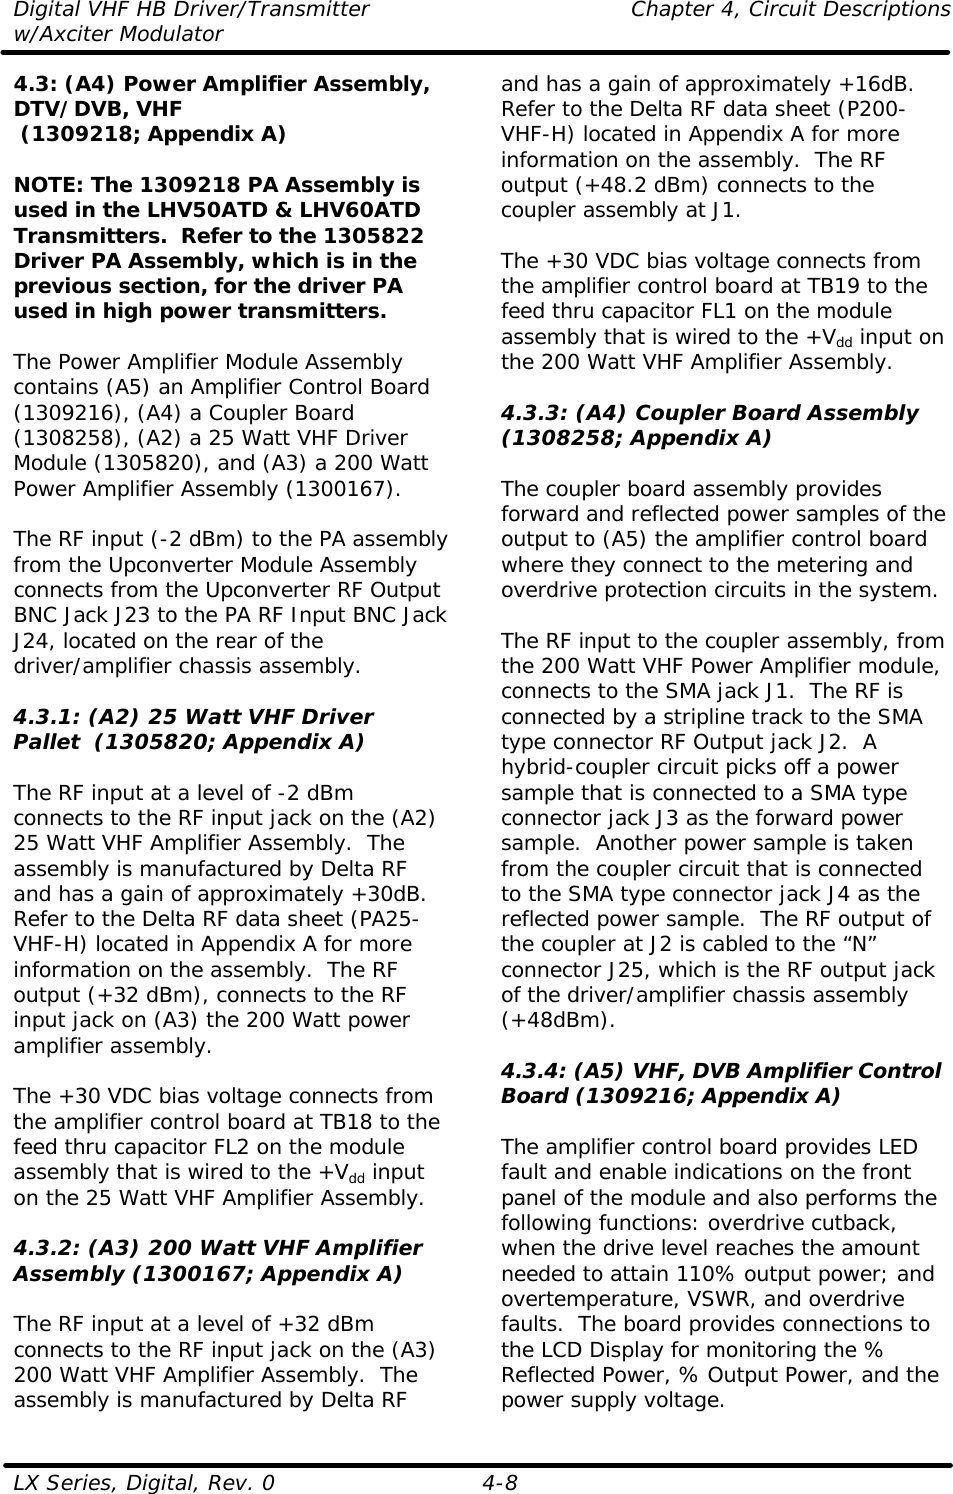 Digital VHF HB Driver/Transmitter    Chapter 4, Circuit Descriptions w/Axciter Modulator LX Series, Digital, Rev. 0    4-8 4.3: (A4) Power Amplifier Assembly, DTV/DVB, VHF  (1309218; Appendix A)  NOTE: The 1309218 PA Assembly is used in the LHV50ATD &amp; LHV60ATD Transmitters.  Refer to the 1305822 Driver PA Assembly, which is in the previous section, for the driver PA used in high power transmitters.  The Power Amplifier Module Assembly contains (A5) an Amplifier Control Board (1309216), (A4) a Coupler Board (1308258), (A2) a 25 Watt VHF Driver Module (1305820), and (A3) a 200 Watt Power Amplifier Assembly (1300167).  The RF input (-2 dBm) to the PA assembly from the Upconverter Module Assembly connects from the Upconverter RF Output BNC Jack J23 to the PA RF Input BNC Jack J24, located on the rear of the driver/amplifier chassis assembly.  4.3.1: (A2) 25 Watt VHF Driver Pallet  (1305820; Appendix A)  The RF input at a level of -2 dBm connects to the RF input jack on the (A2) 25 Watt VHF Amplifier Assembly.  The assembly is manufactured by Delta RF and has a gain of approximately +30dB.  Refer to the Delta RF data sheet (PA25-VHF-H) located in Appendix A for more information on the assembly.  The RF output (+32 dBm), connects to the RF input jack on (A3) the 200 Watt power amplifier assembly.  The +30 VDC bias voltage connects from the amplifier control board at TB18 to the feed thru capacitor FL2 on the module assembly that is wired to the +Vdd input on the 25 Watt VHF Amplifier Assembly.  4.3.2: (A3) 200 Watt VHF Amplifier Assembly (1300167; Appendix A)  The RF input at a level of +32 dBm connects to the RF input jack on the (A3) 200 Watt VHF Amplifier Assembly.  The assembly is manufactured by Delta RF and has a gain of approximately +16dB.  Refer to the Delta RF data sheet (P200-VHF-H) located in Appendix A for more information on the assembly.  The RF output (+48.2 dBm) connects to the coupler assembly at J1.  The +30 VDC bias voltage connects from the amplifier control board at TB19 to the feed thru capacitor FL1 on the module assembly that is wired to the +Vdd input on the 200 Watt VHF Amplifier Assembly.  4.3.3: (A4) Coupler Board Assembly (1308258; Appendix A)  The coupler board assembly provides forward and reflected power samples of the output to (A5) the amplifier control board where they connect to the metering and overdrive protection circuits in the system.  The RF input to the coupler assembly, from the 200 Watt VHF Power Amplifier module, connects to the SMA jack J1.  The RF is connected by a stripline track to the SMA type connector RF Output jack J2.  A hybrid-coupler circuit picks off a power sample that is connected to a SMA type connector jack J3 as the forward power sample.  Another power sample is taken from the coupler circuit that is connected to the SMA type connector jack J4 as the reflected power sample.  The RF output of the coupler at J2 is cabled to the “N” connector J25, which is the RF output jack of the driver/amplifier chassis assembly (+48dBm).  4.3.4: (A5) VHF, DVB Amplifier Control Board (1309216; Appendix A)  The amplifier control board provides LED fault and enable indications on the front panel of the module and also performs the following functions: overdrive cutback, when the drive level reaches the amount needed to attain 110% output power; and overtemperature, VSWR, and overdrive faults.  The board provides connections to the LCD Display for monitoring the % Reflected Power, % Output Power, and the power supply voltage. 